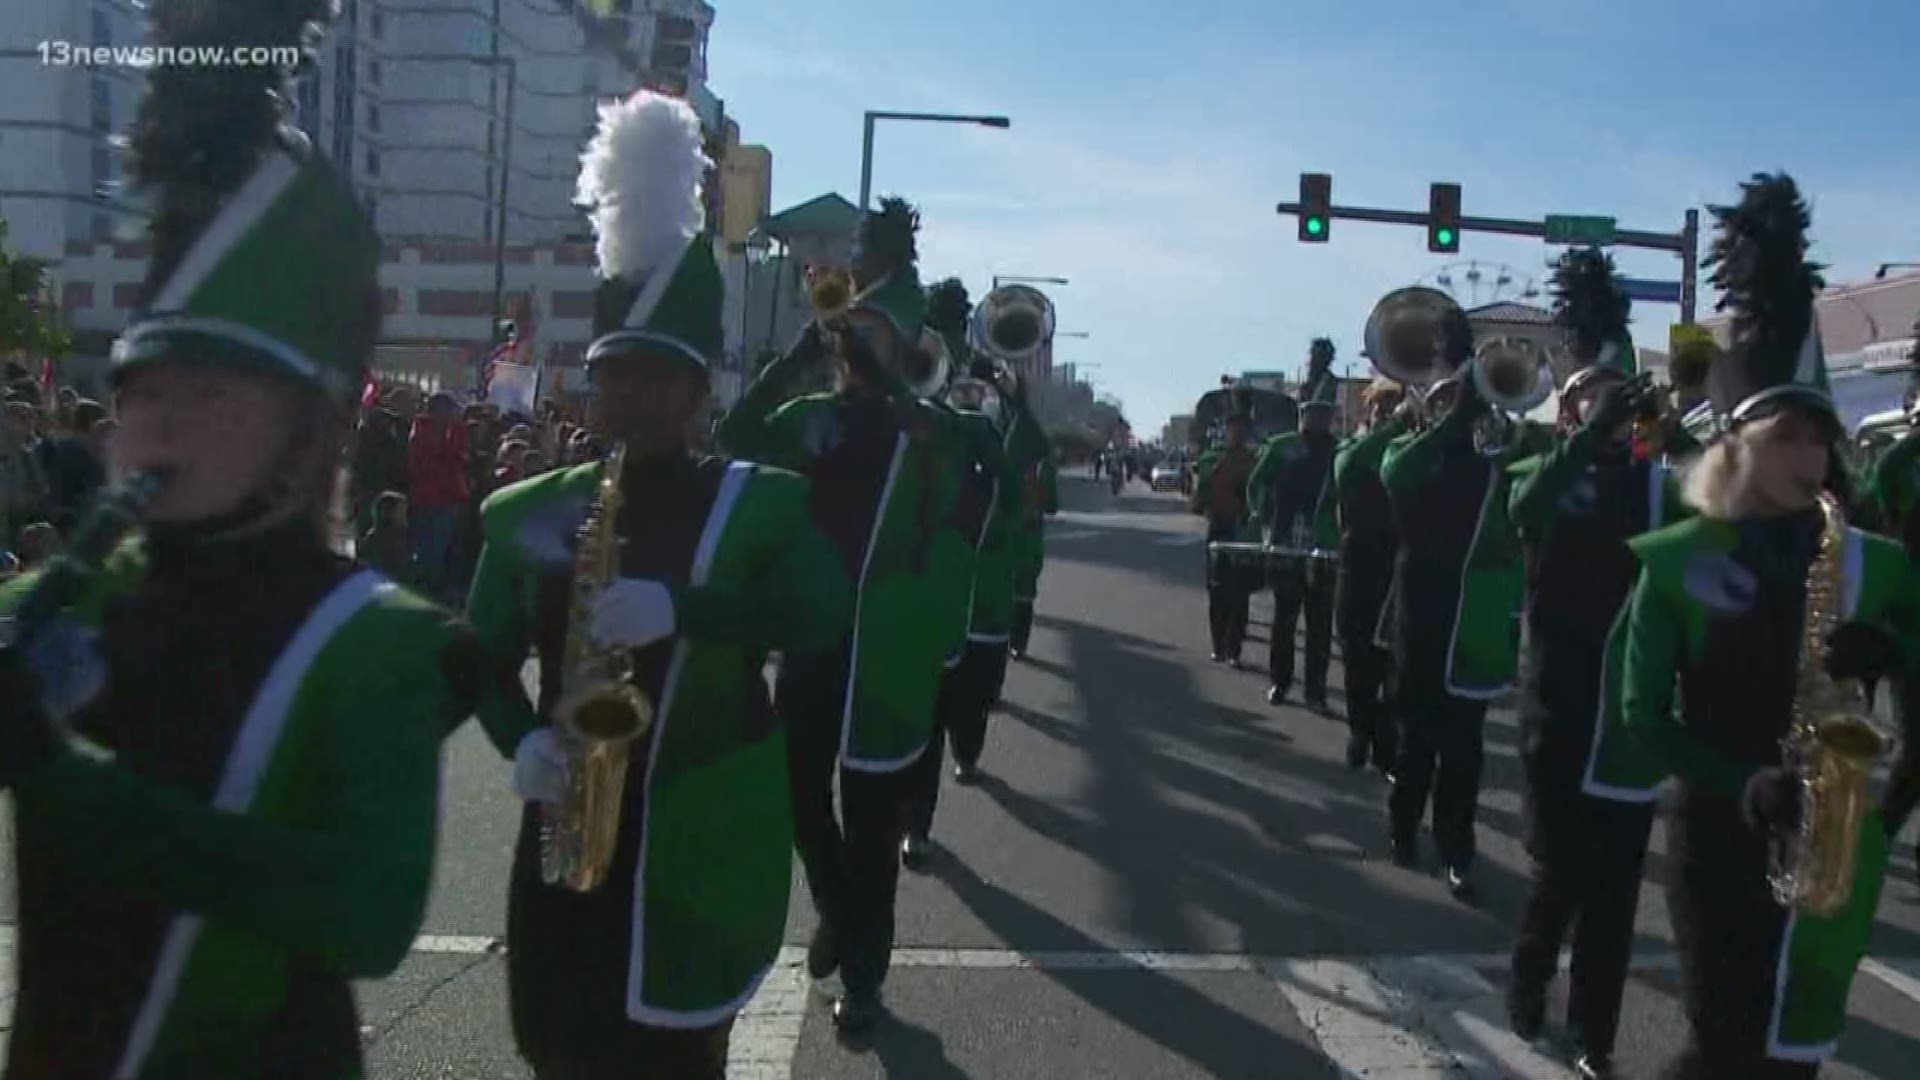 In Virginia Beach, the annual Tidewater Veterans Day parade and ceremony attracted many people around Hampton Roads. 13News Now had a front-row seat to the event.